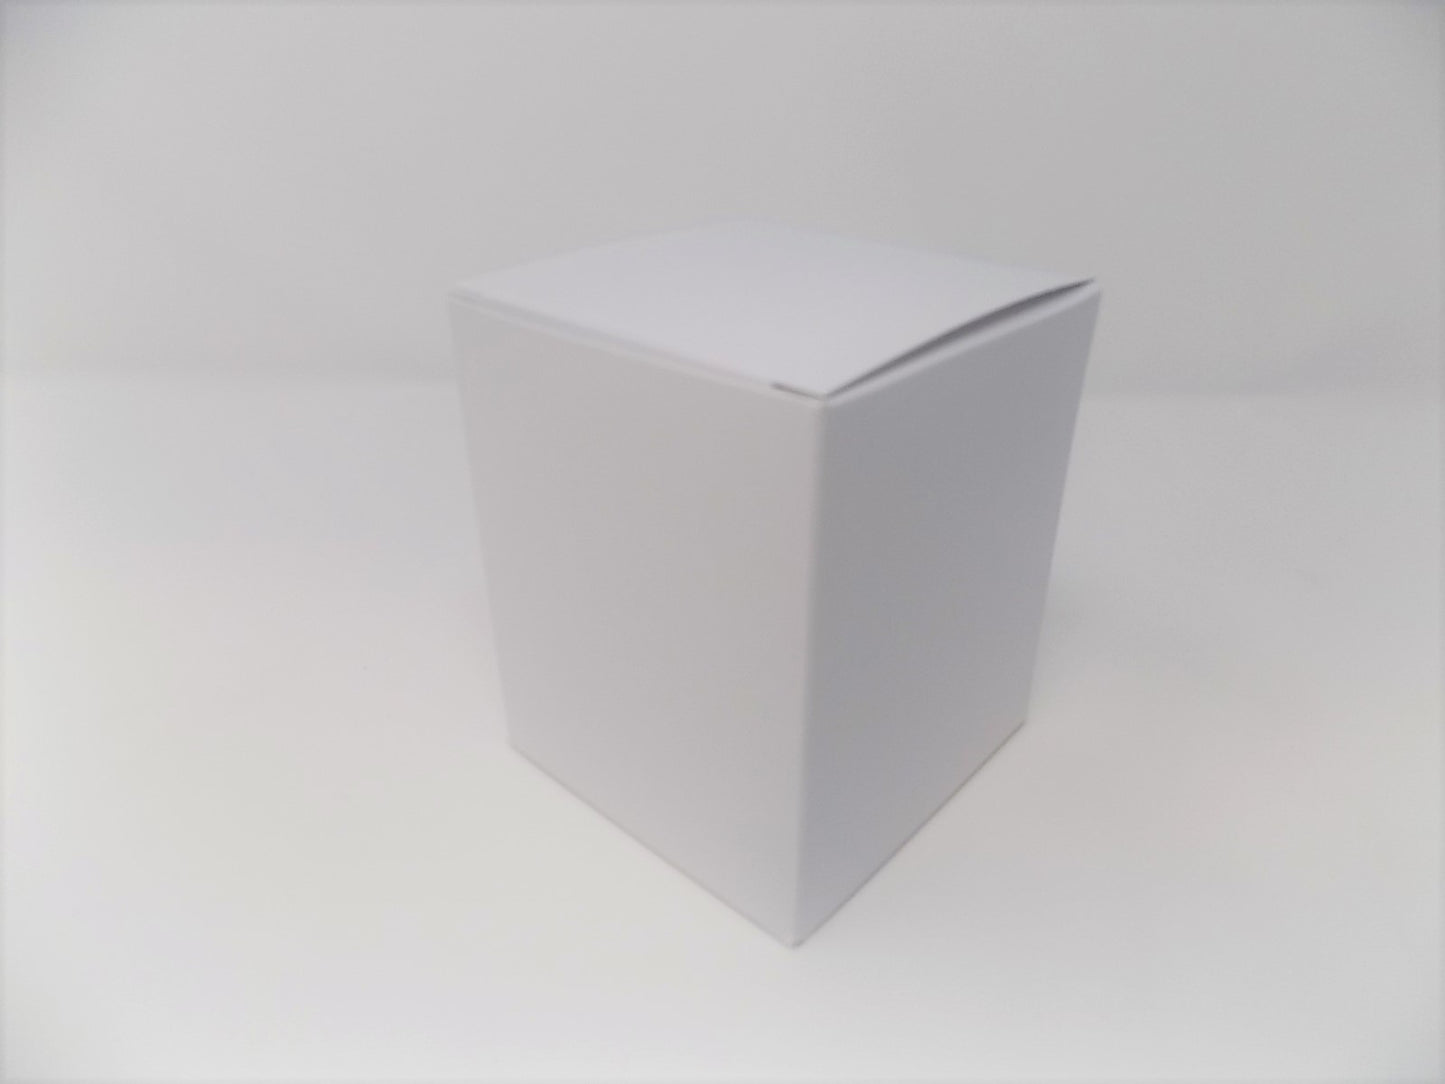 30CL CANDLE BOX - WHITE ENVELOPE BASE (Pack of 10)